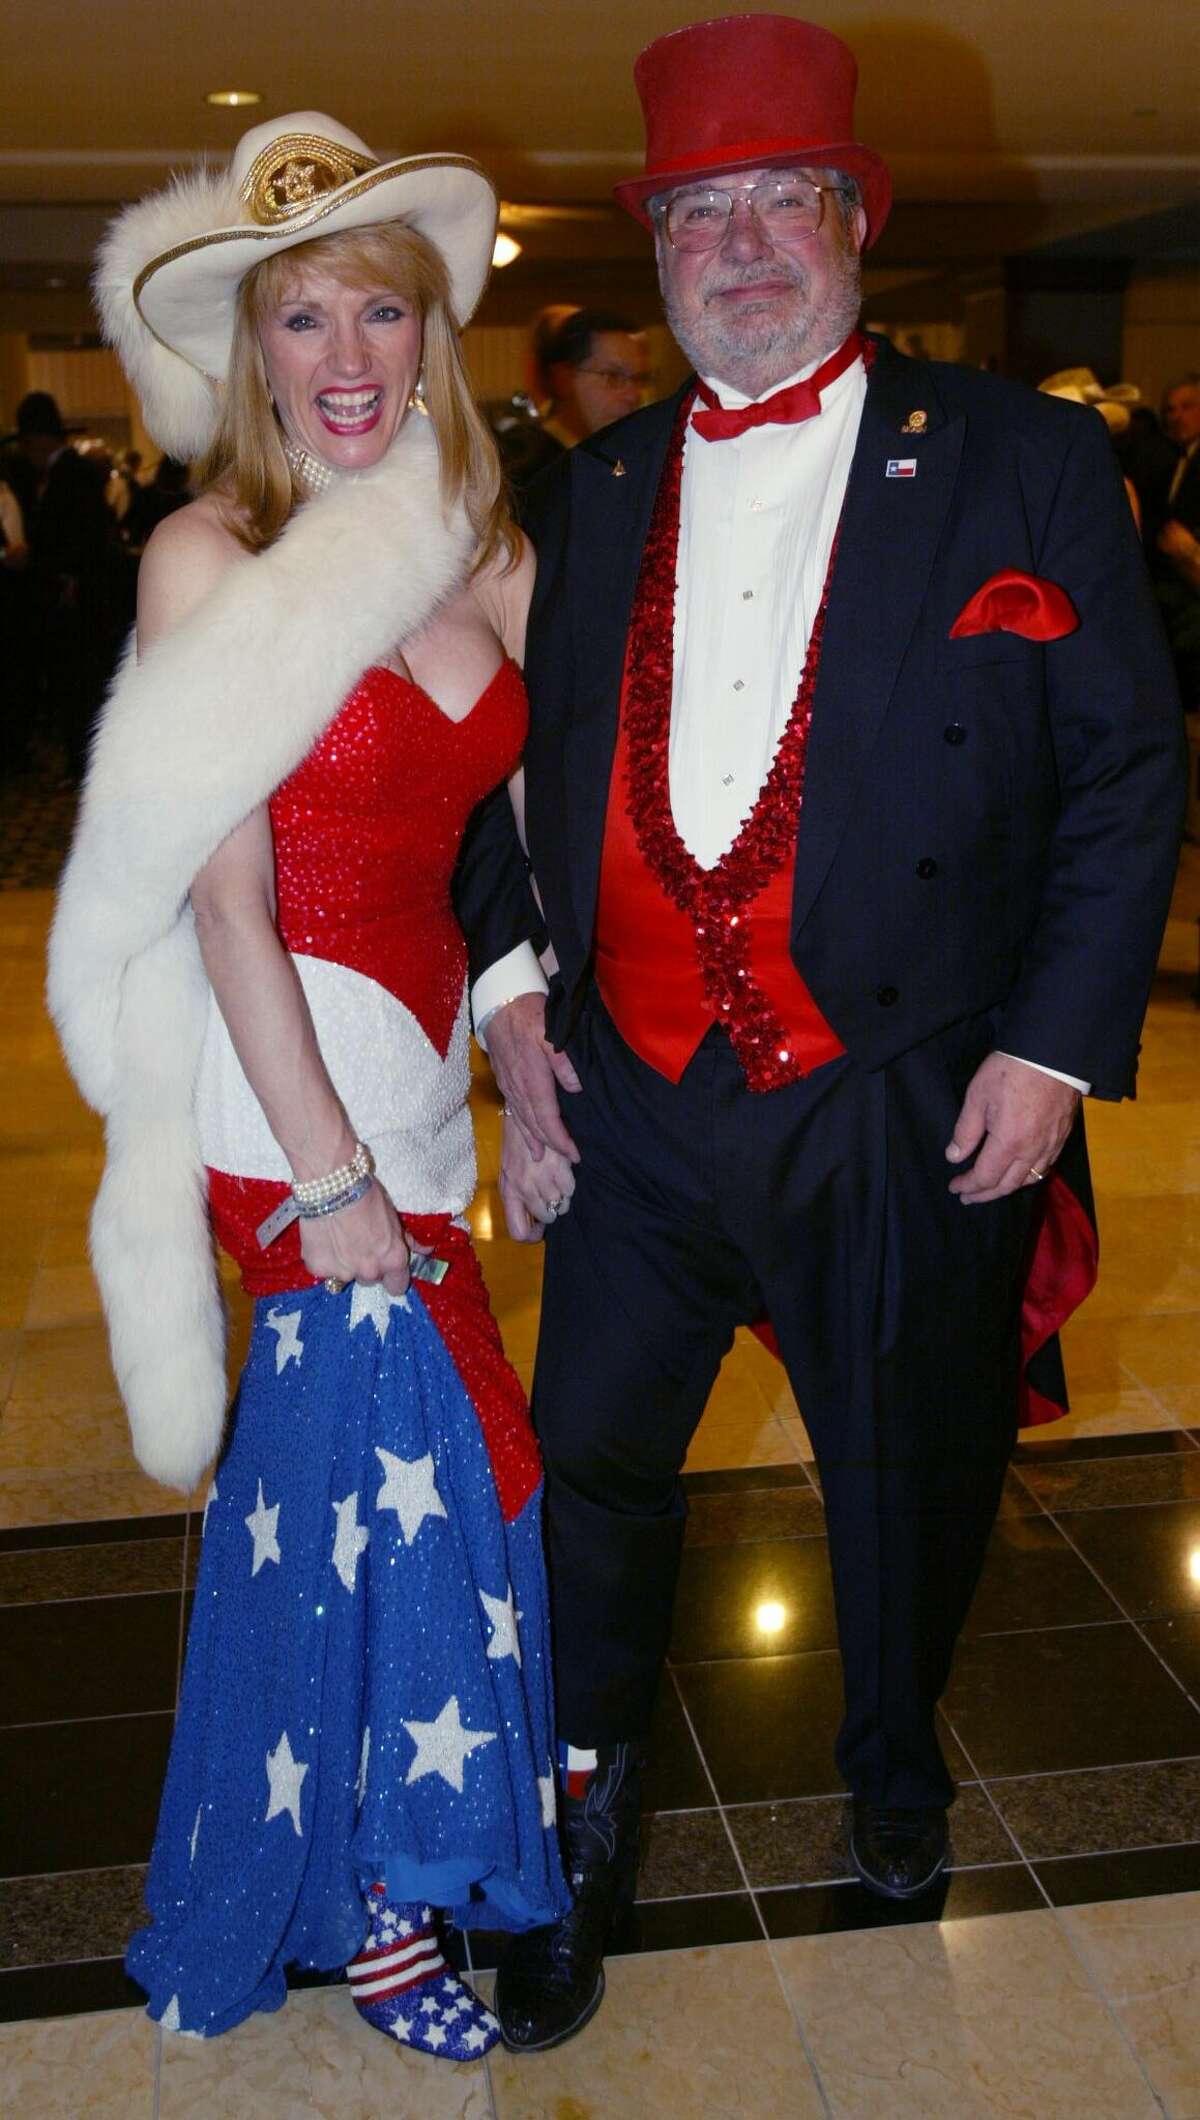 Woodlands residents Nelda Blair and her husband Jim sport colorful, patriotic outfits at the Texas Black Tie and Boots Ball in Washington DC Wednesday Jan. 19, 2005. The dress was made by Dallas designer Mike Benet, while Blair sewed the husband's vest herself. 